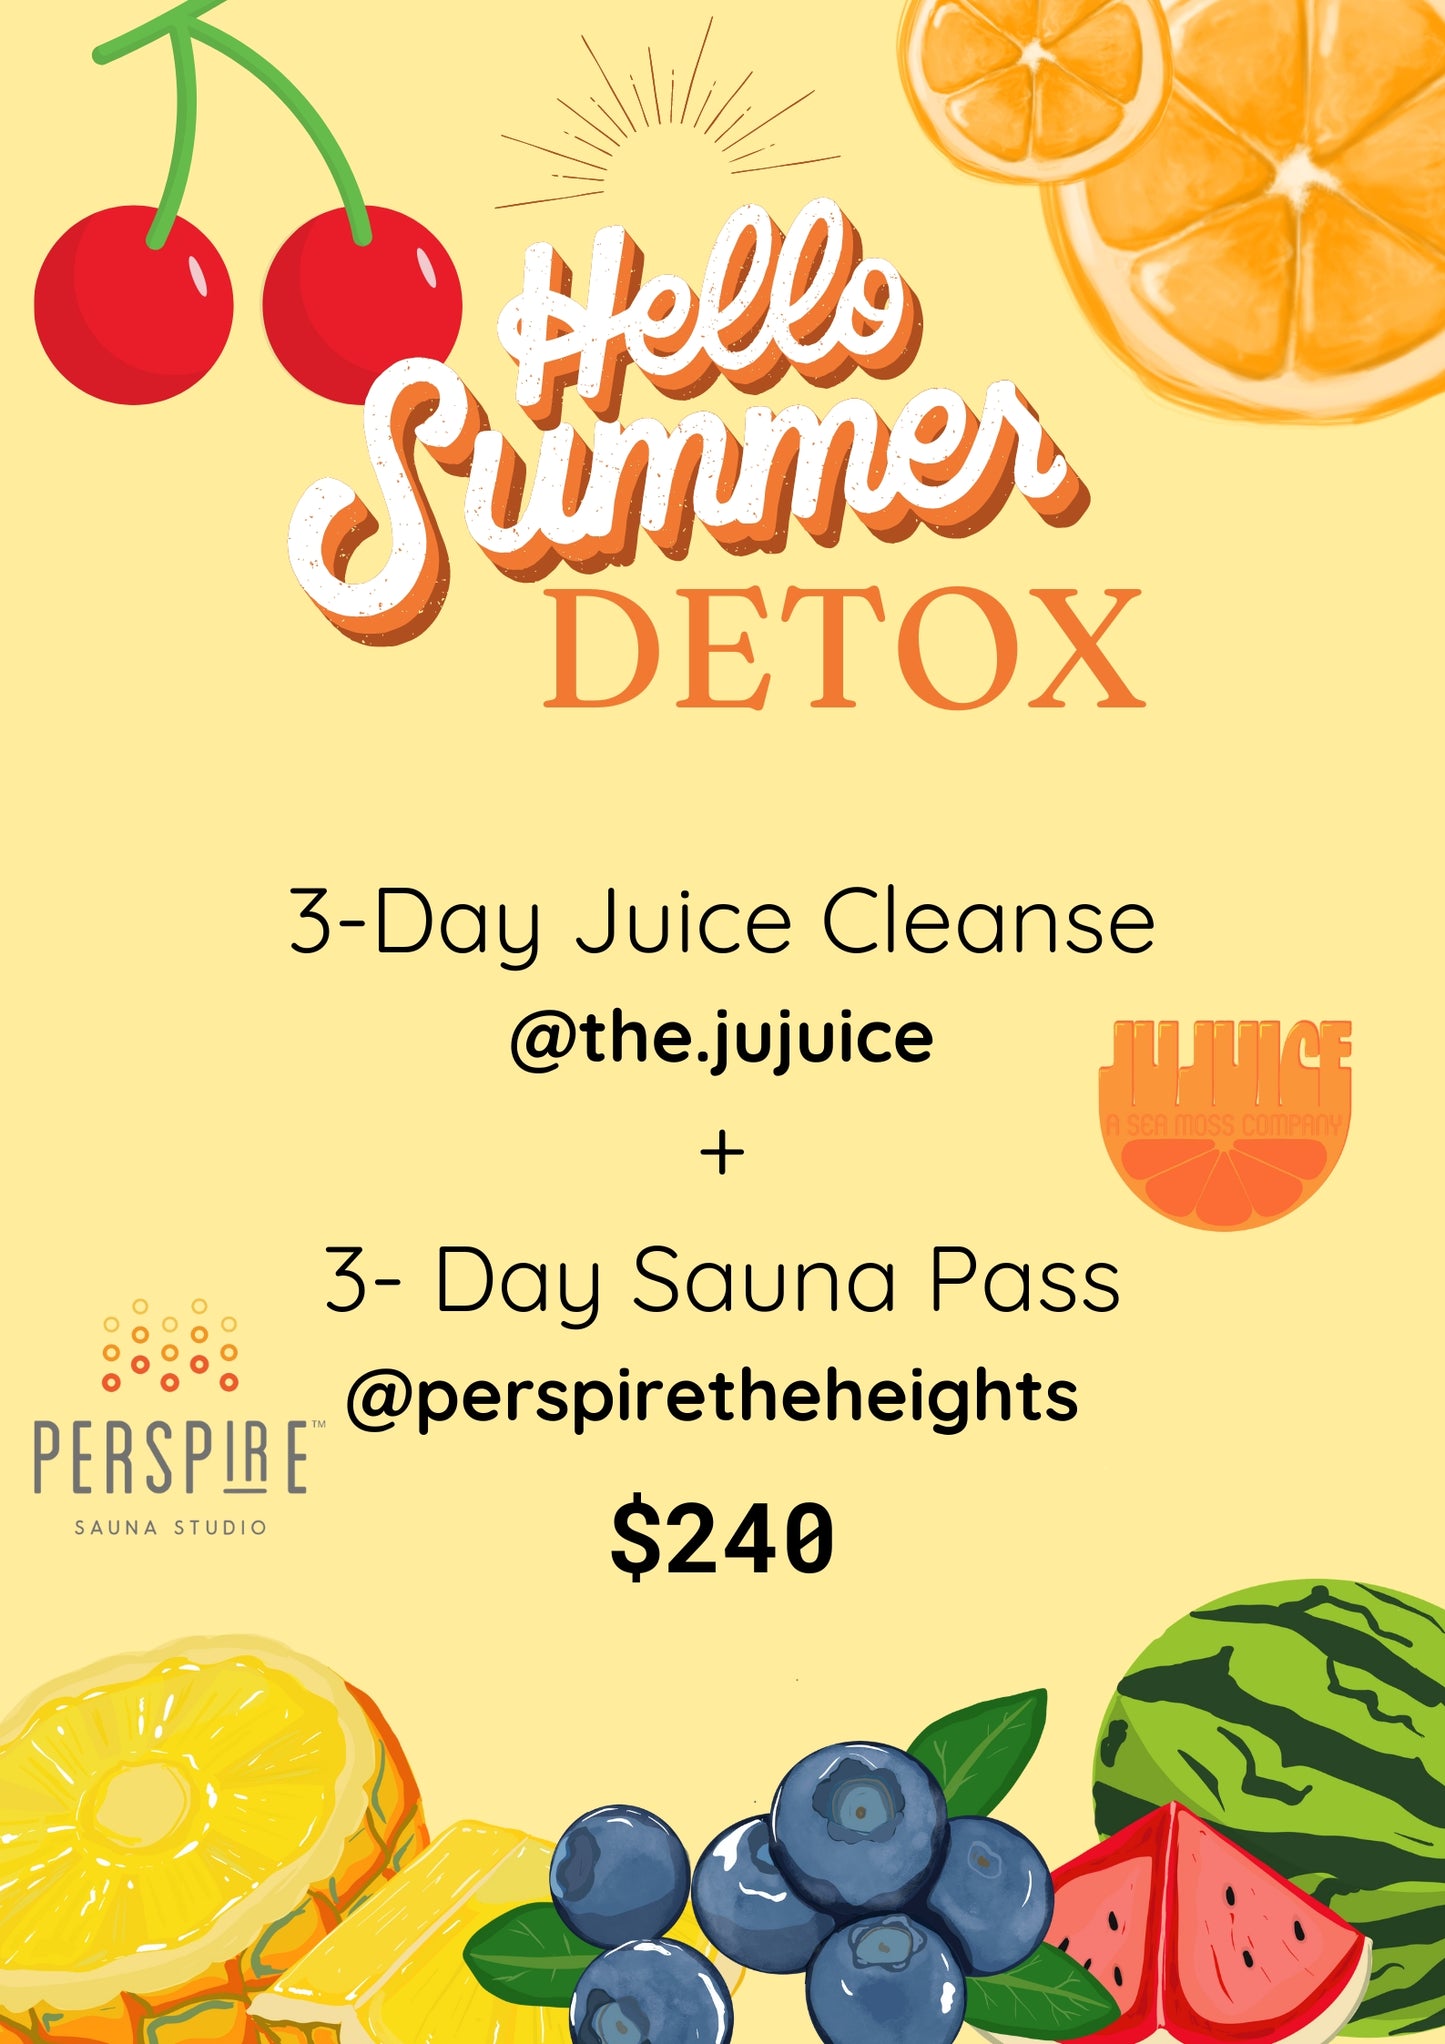 3 Day Cleanse with 3 Day Sauna Pass